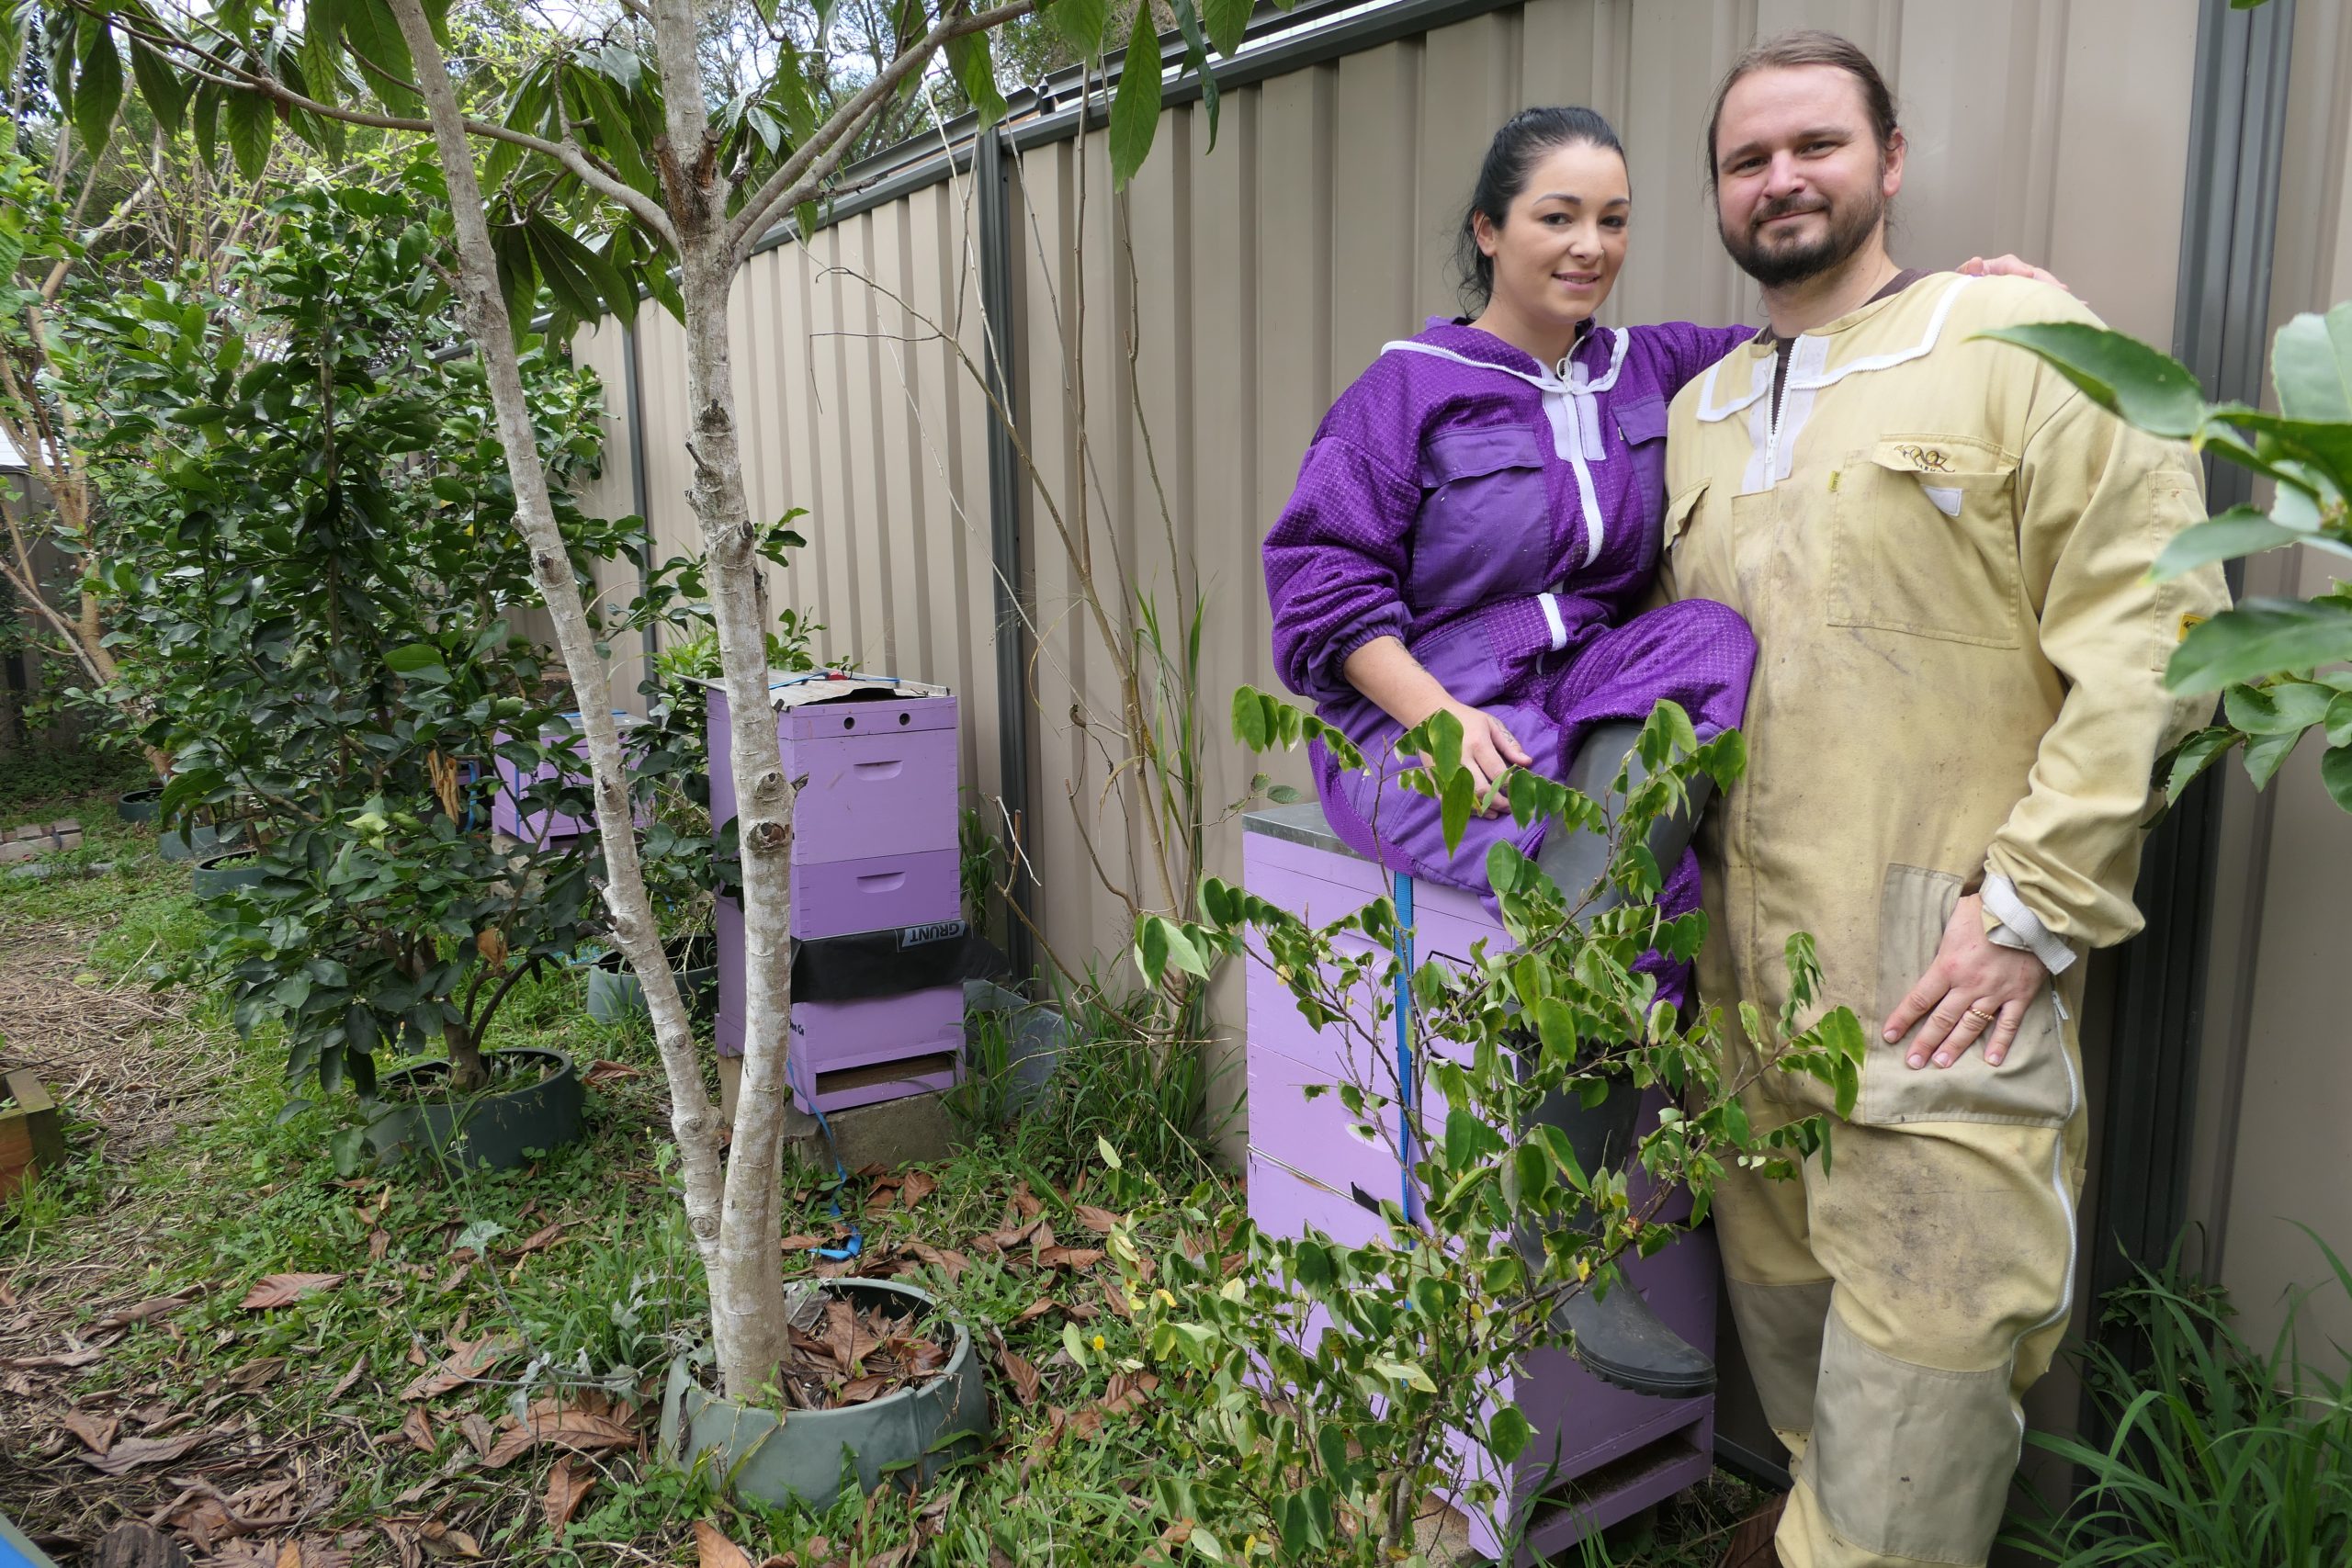 Talis and Stephanie, founders of Urban Bee Co, with some of their hives